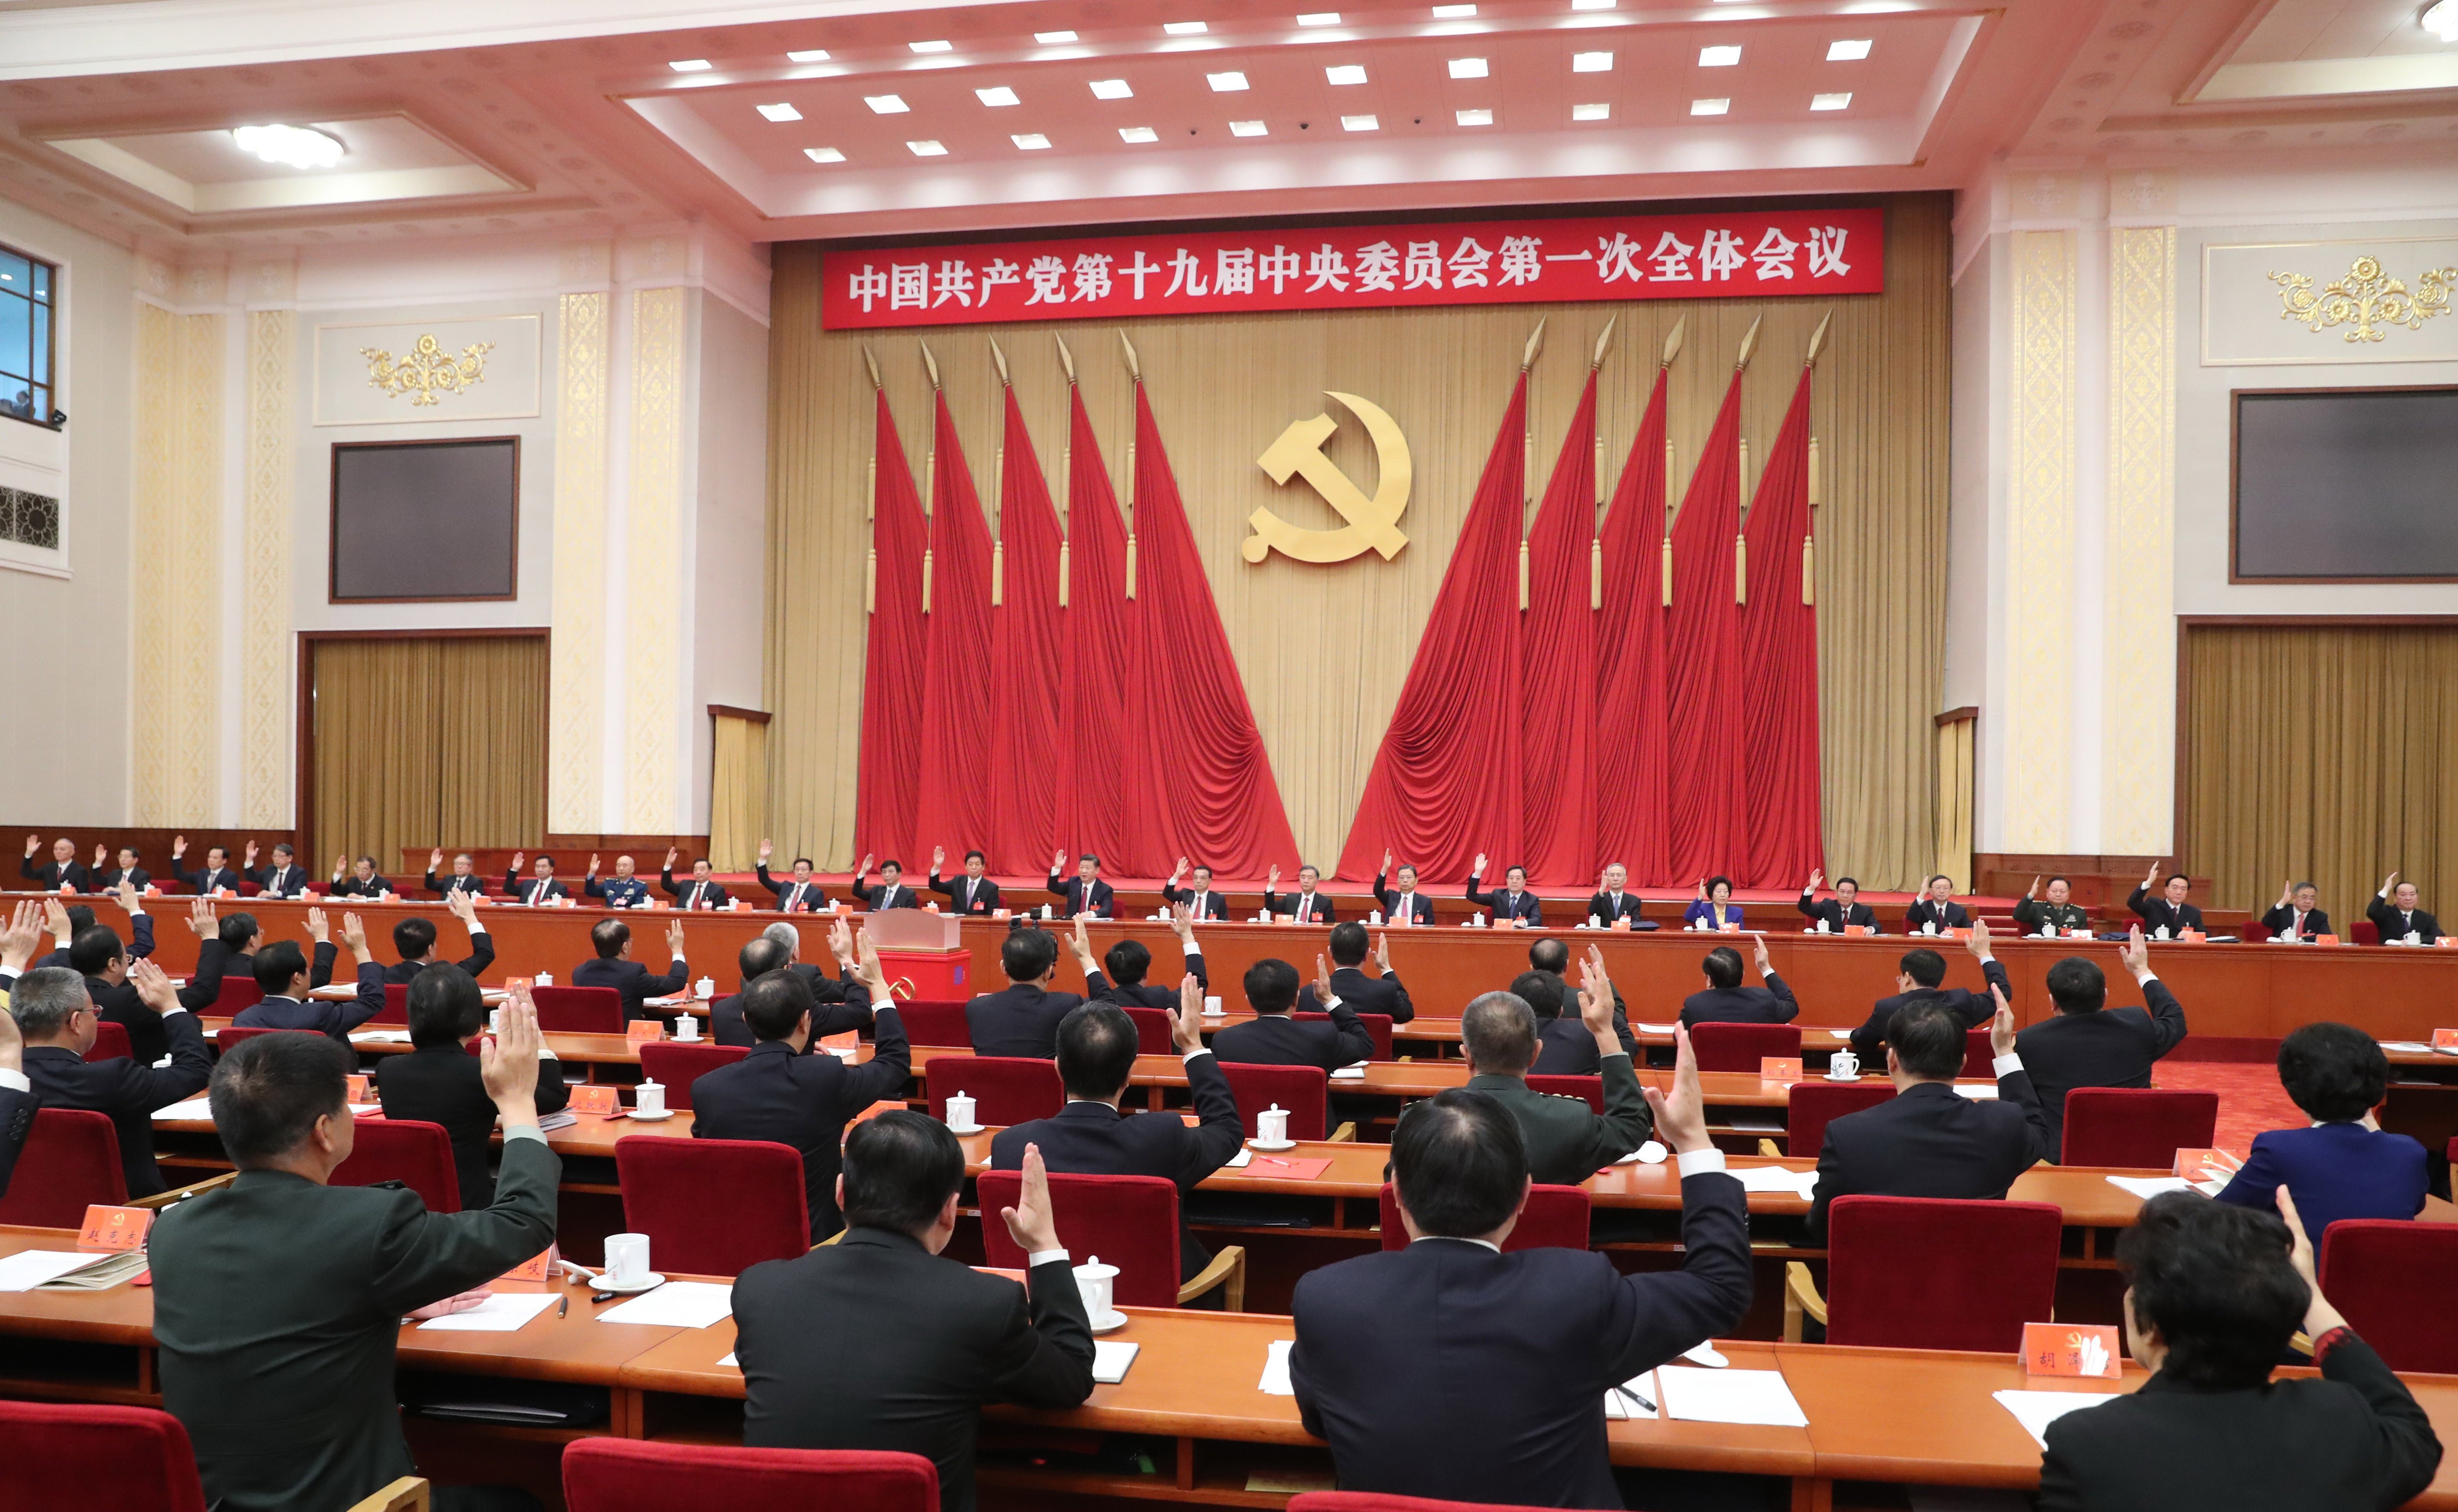 The new Central Committee holds its first plenary session at the Great Hall of the People in Beijing on October 25, 2017. Photo: Xinhua